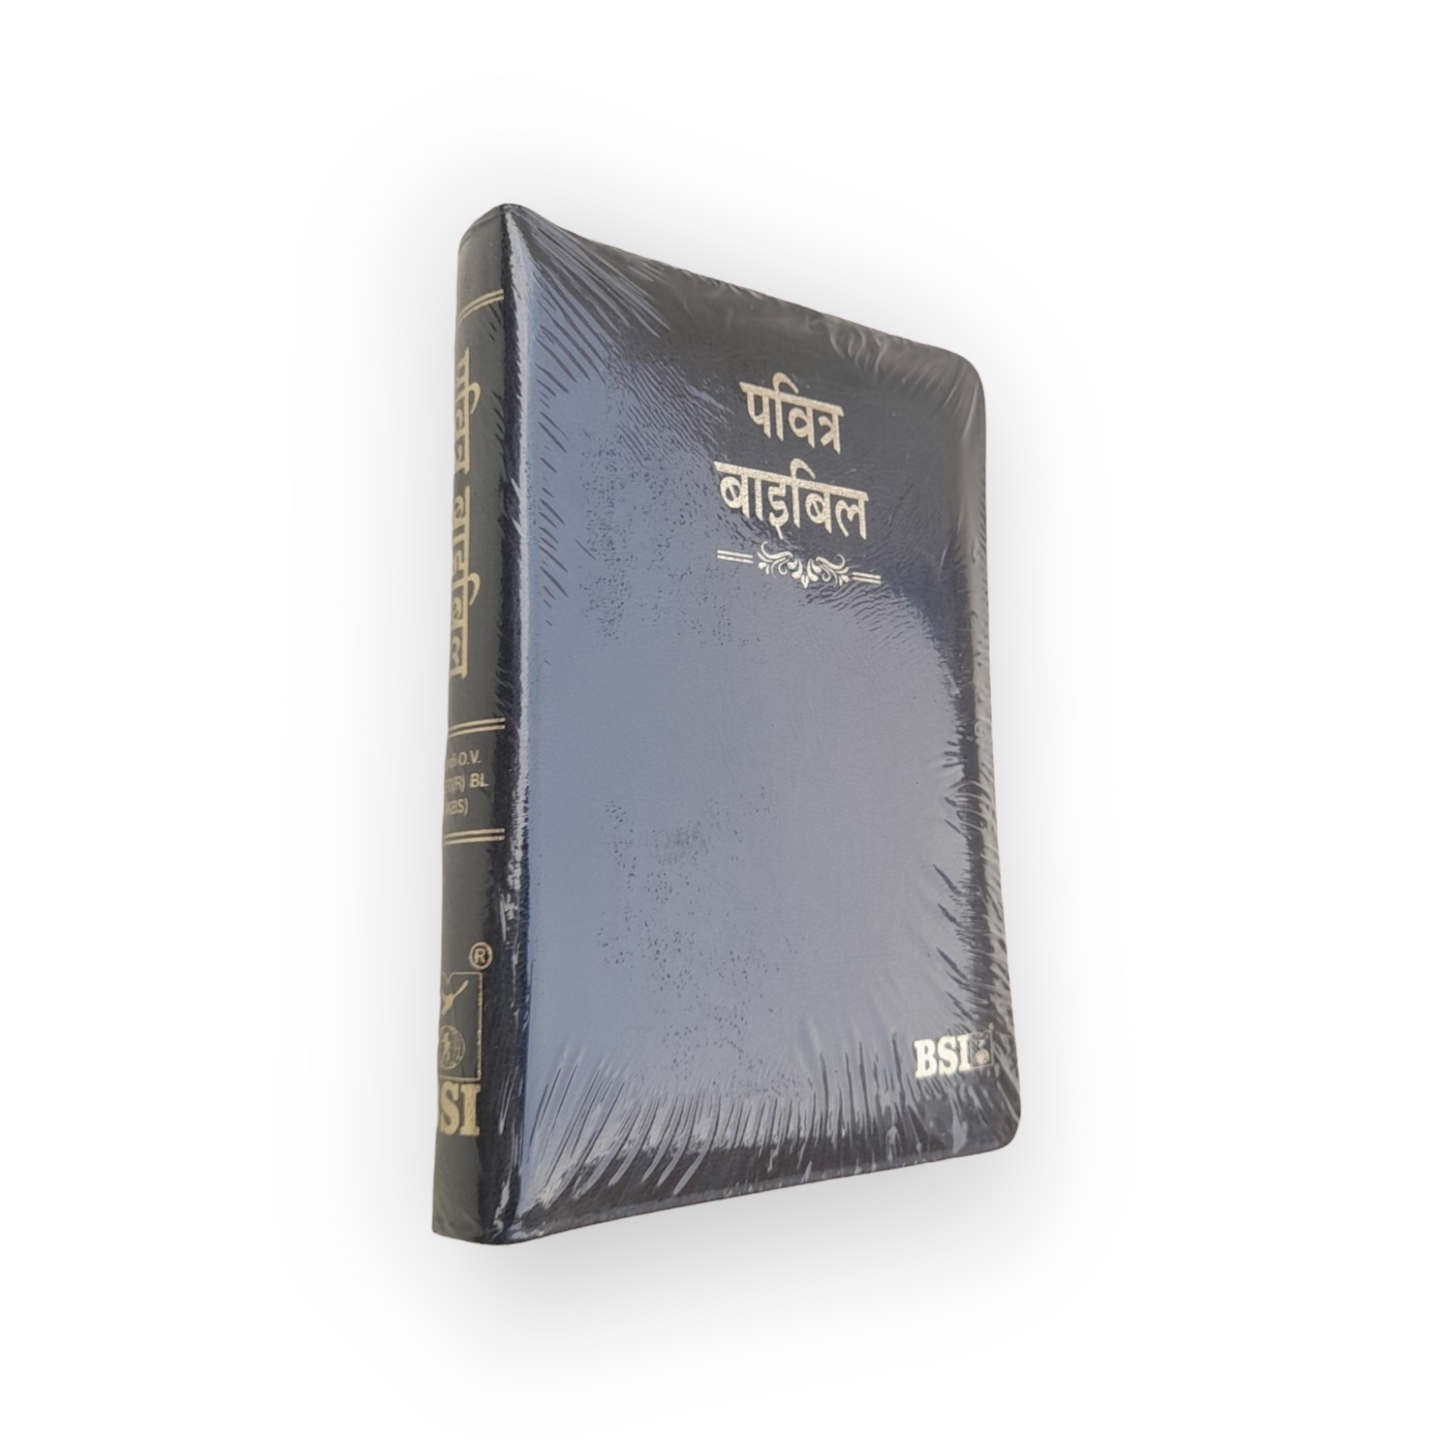 KBS Hindi Bible | With Thumb Index | Korean Printed Edition | In Black Color | With Zip